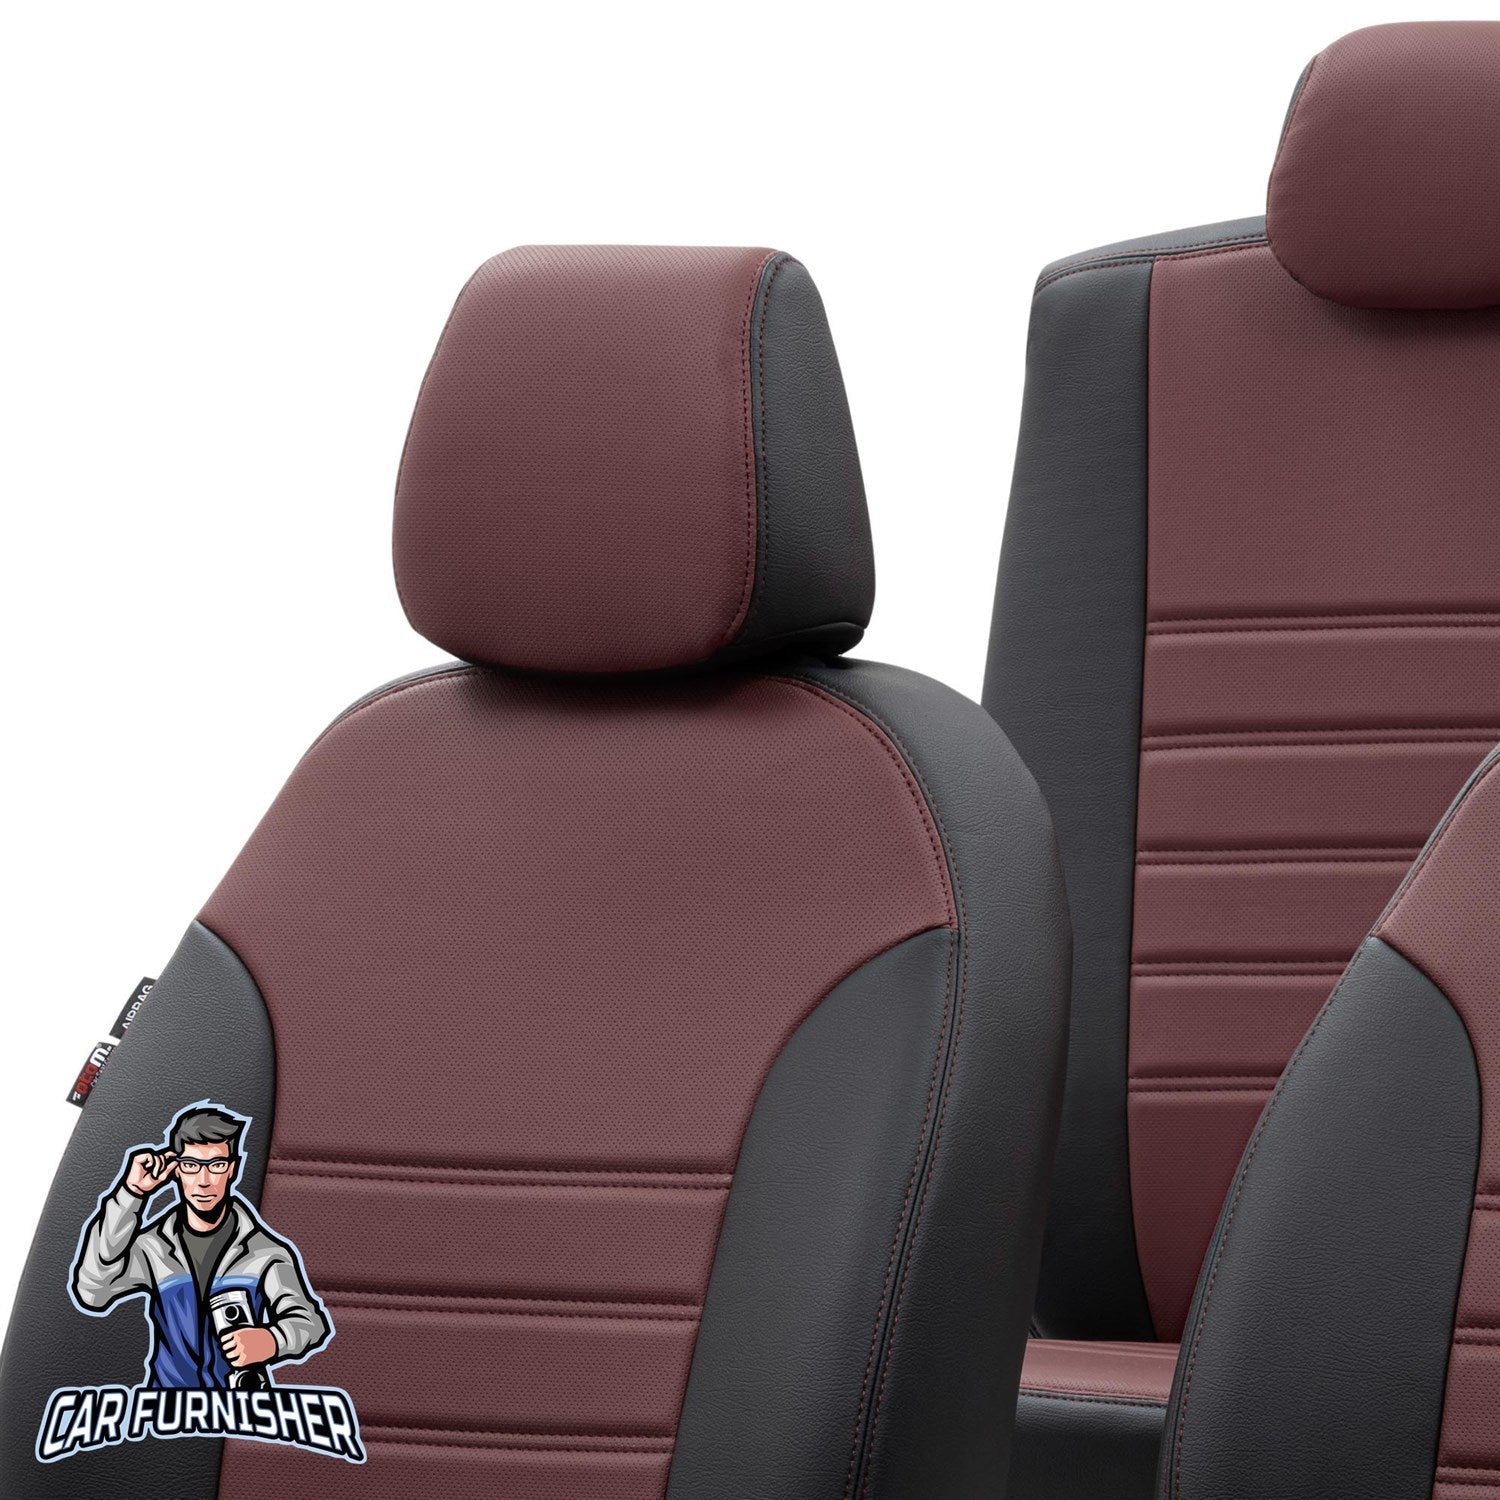 Toyota Camry Seat Cover Istanbul Leather Design Burgundy Leather